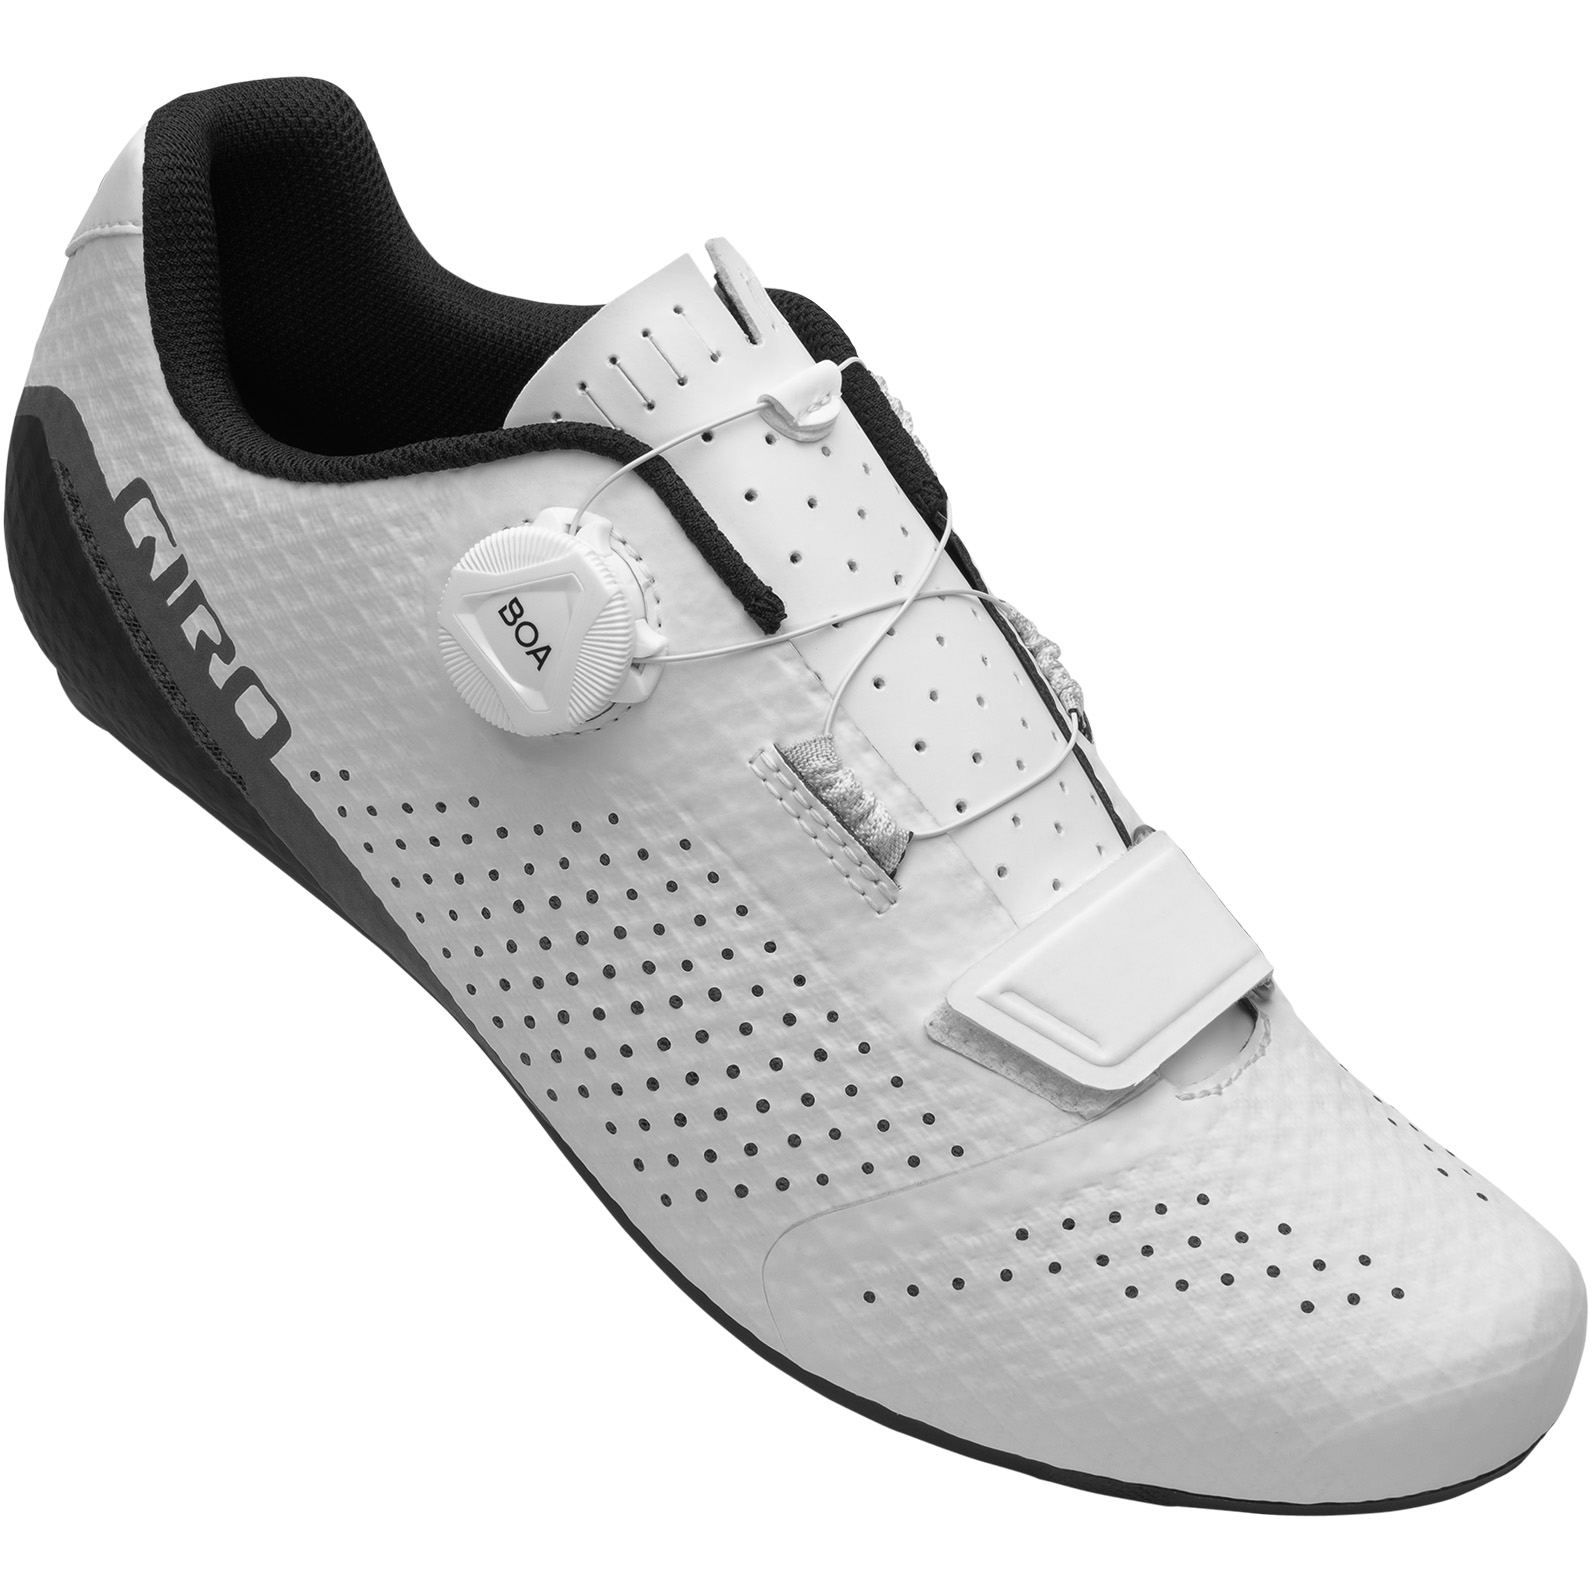 Picture of Giro Cadet Road Shoes - white